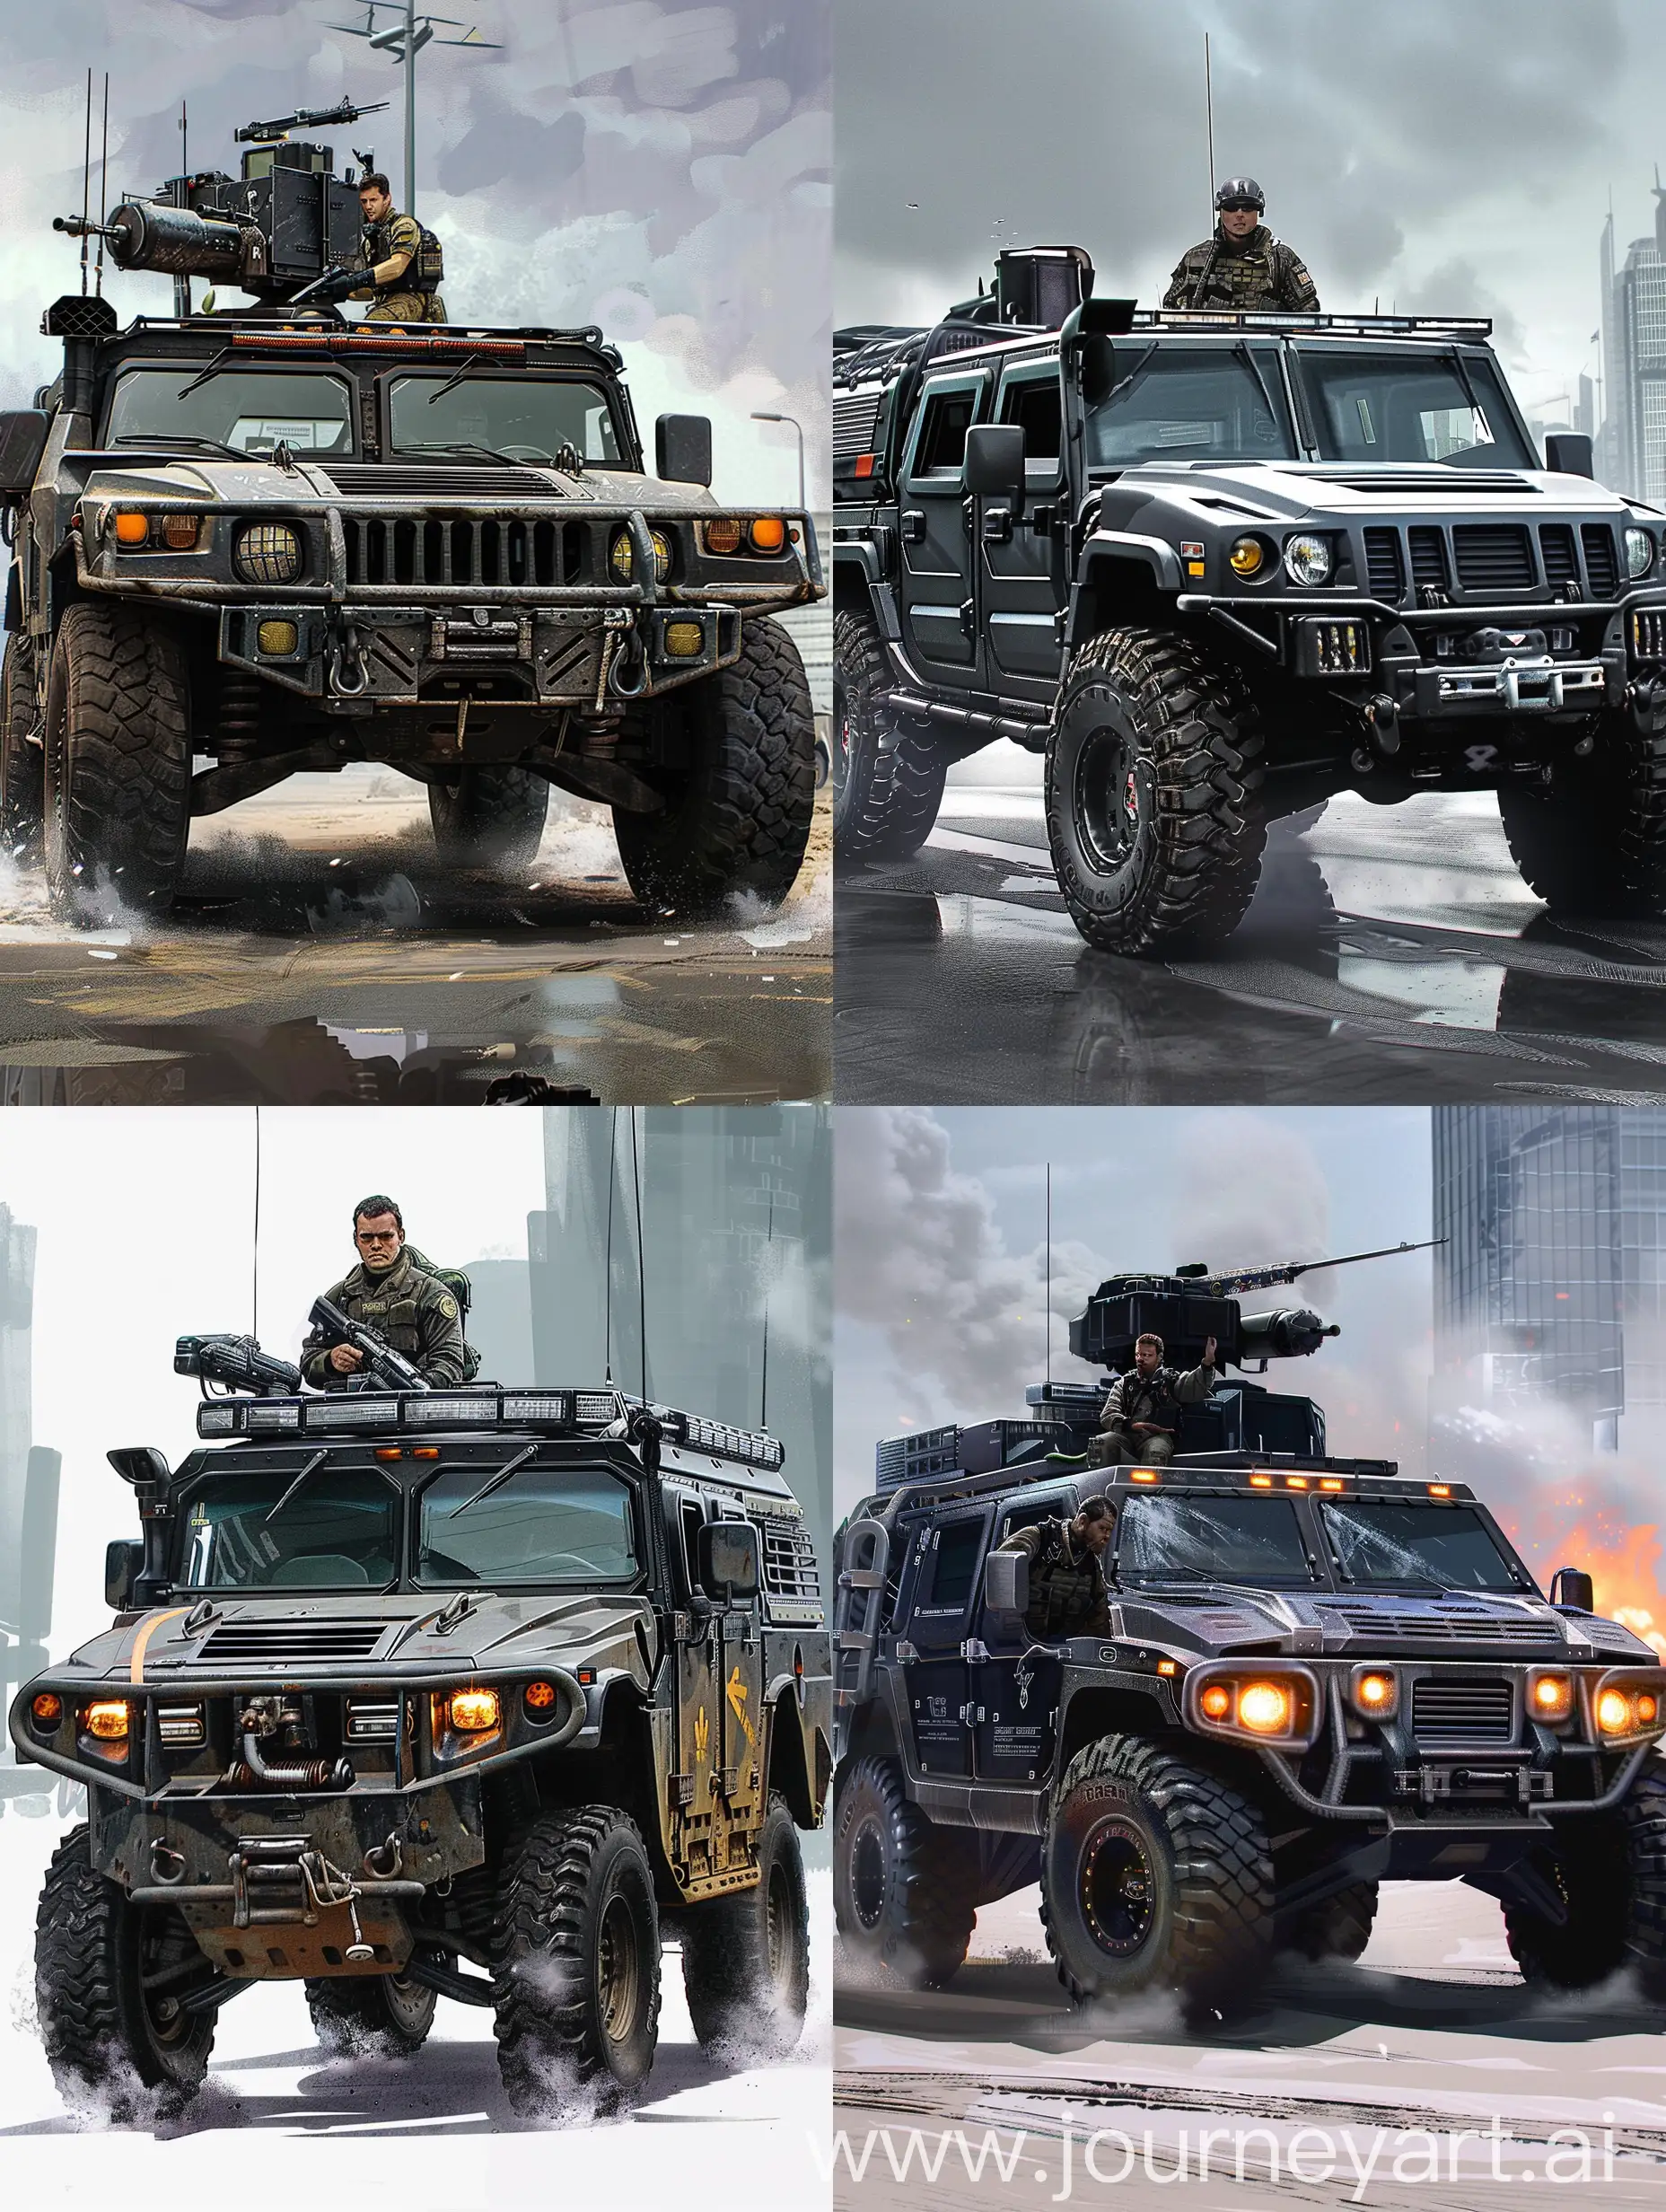 A group of soldiers dressed in black and in front of them Josh Dummel is wearing a black military uniform and has a gun in his hand, in the background the Rescue H2 HUMMER car has a black military design, black and gray color predominance, the soldiers' vehicle is the H2 HUMMER rescue car, drawn in Concept art style, desert view in the background, daytime, There is iron armor in front of the H2 Hummer, the vehicle wheels are large tires with thick treads, the vehicle is high, Josh Dummel is in the foreground as a soldier, there are 3 soldiers behind him.   https://hasbropulse.com/cdn/shop/products/F71015L00_detail_22_Online_2000SQ.jpg?v=1663884204&width=1200 , https://encrypted-tbn0.gstatic.com/images?q=tbn:ANd9GcTZ9mfZCY8d5HDsGEb2SMhmesVyOfCV3lUYAg&usqp=CAU Black H2 HUMMER Rexcue Car   https://upload.wikimedia.org/wikipedia/commons/thumb/7/7d/Hummer_H2_Transformer.jpg/1200px-Hummer_H2_Transformer.jpg  Drawing illustration in illustration concept design style



